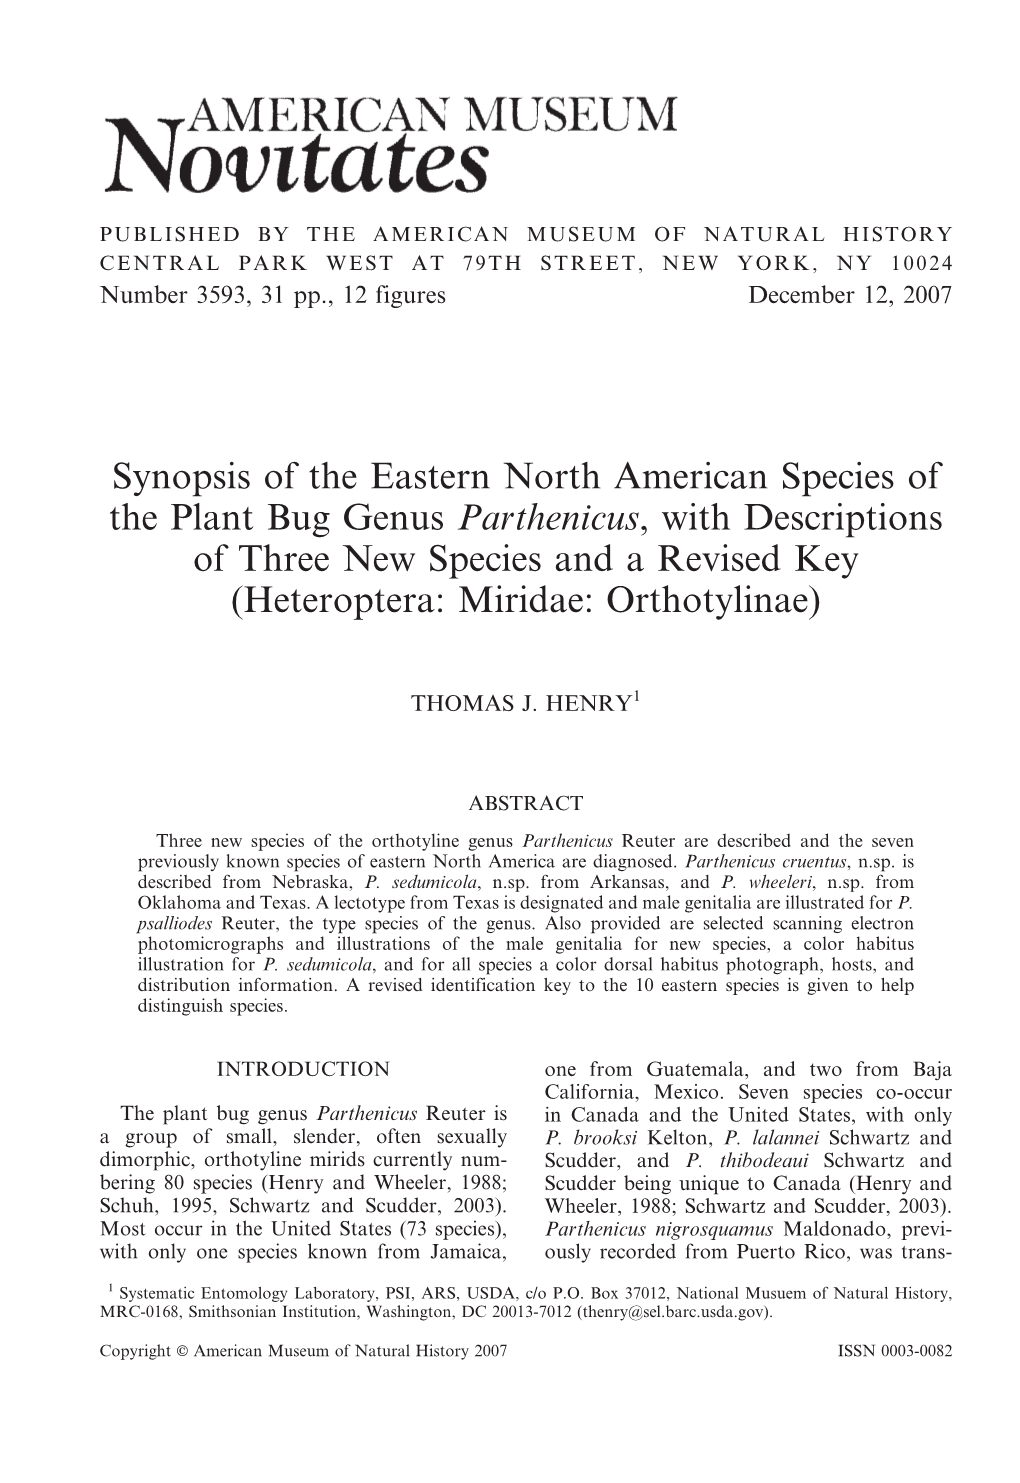 Synopsis of the Eastern North American Species of the Plant Bug